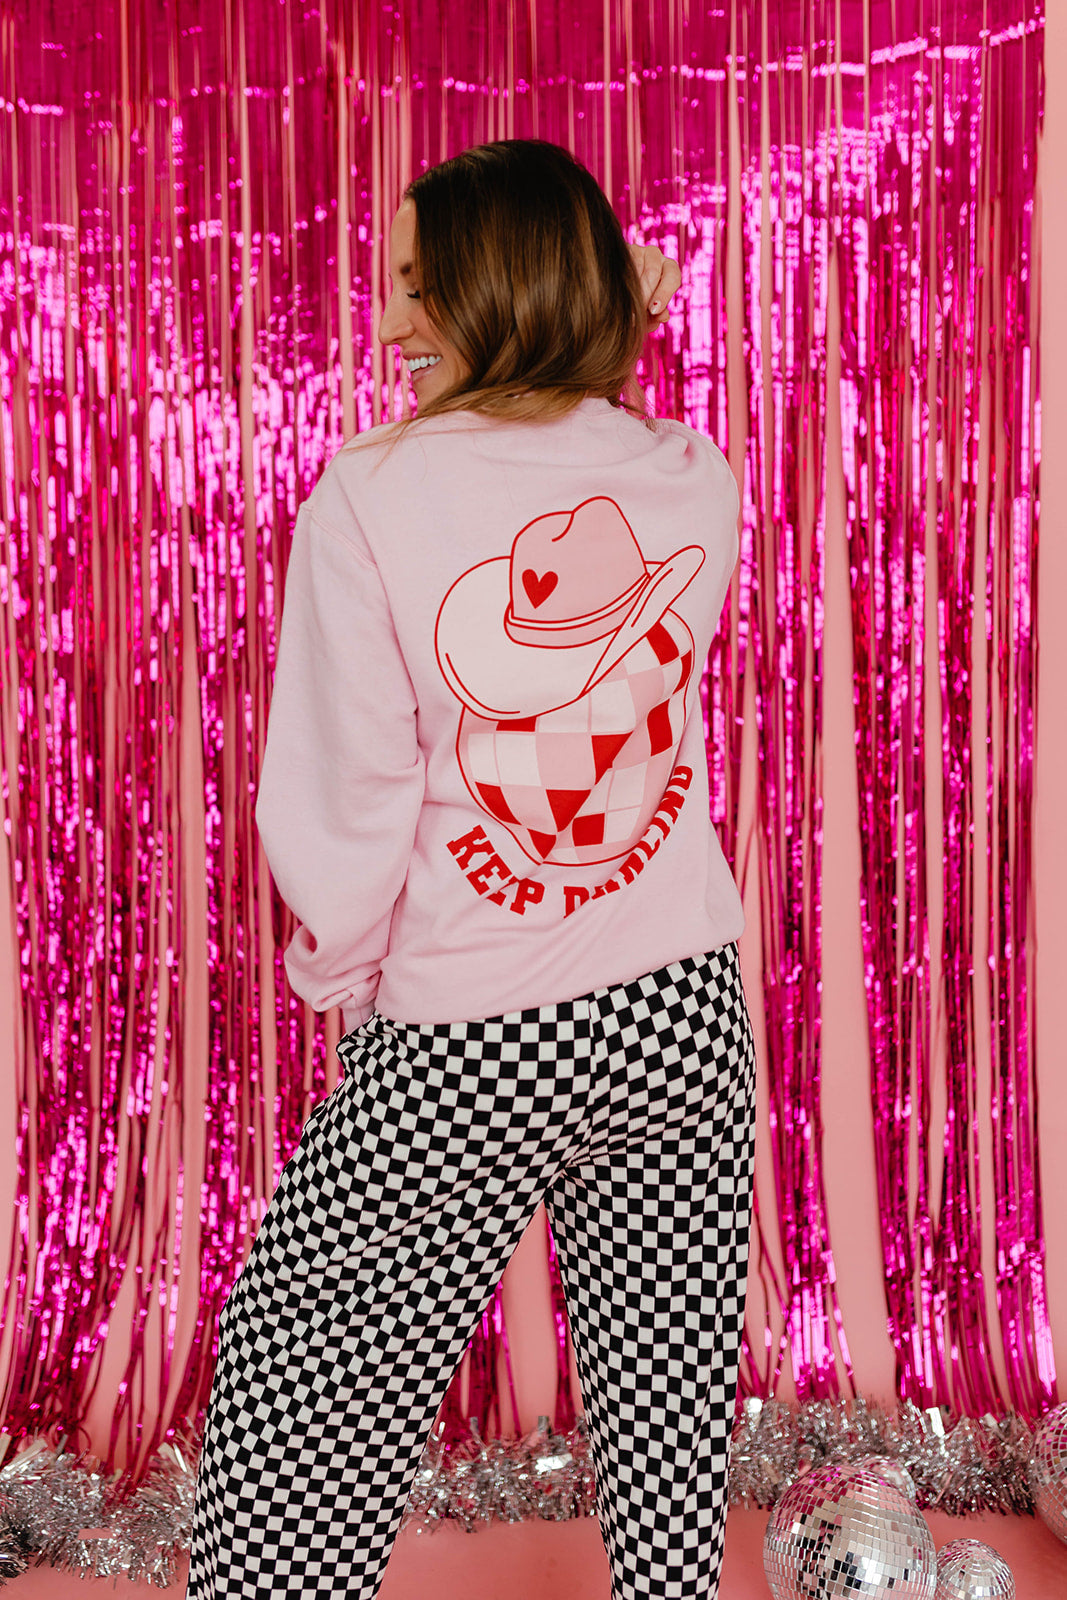 THE KEEP DANCING PULLOVER IN PINK BY PINK DESERT